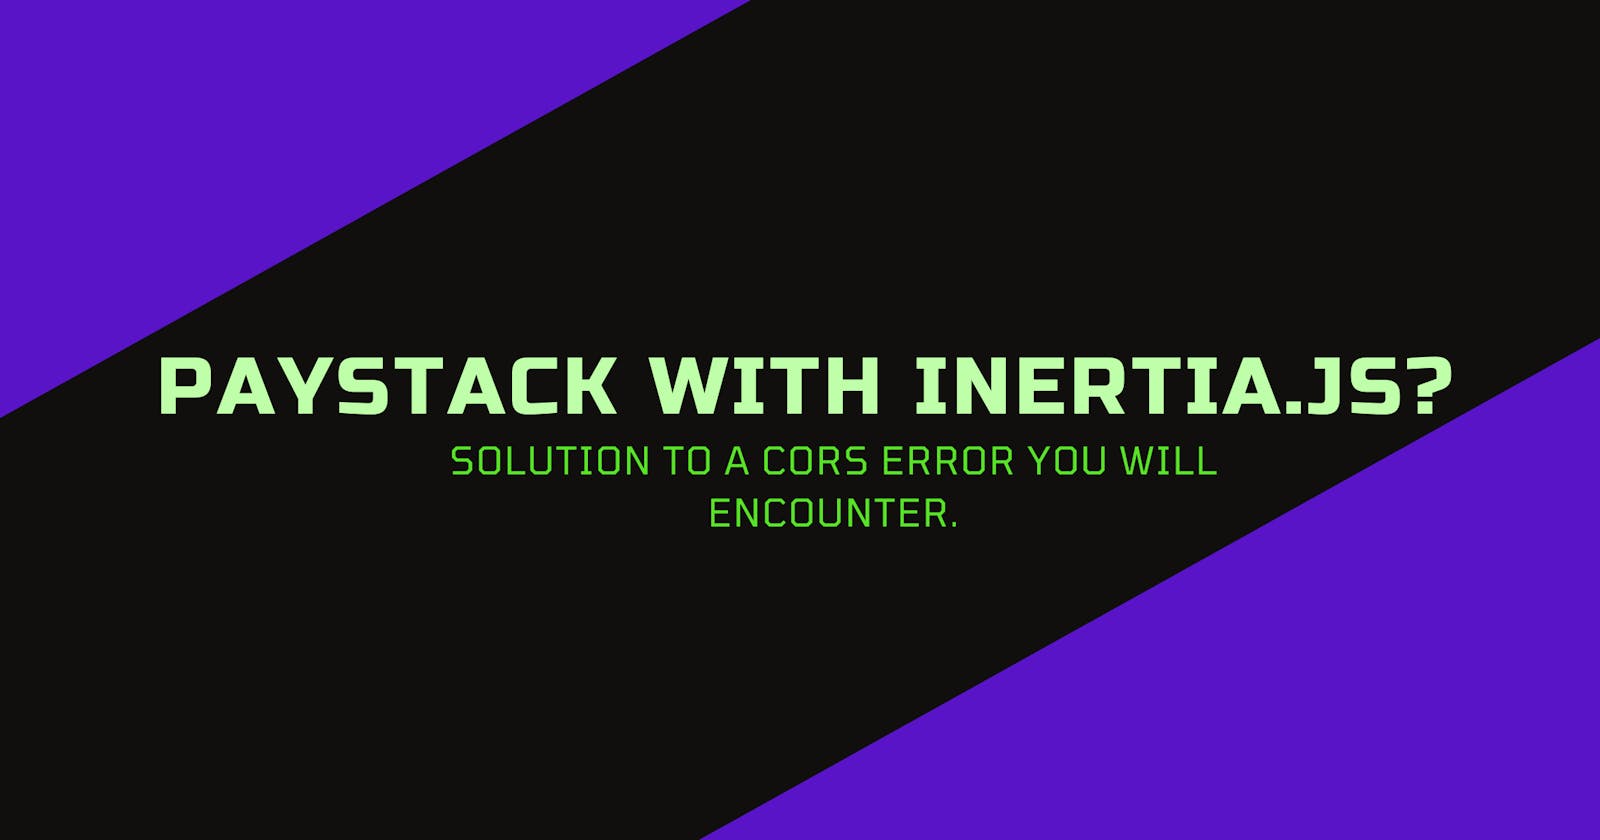 Paystack with Inertia.Js?